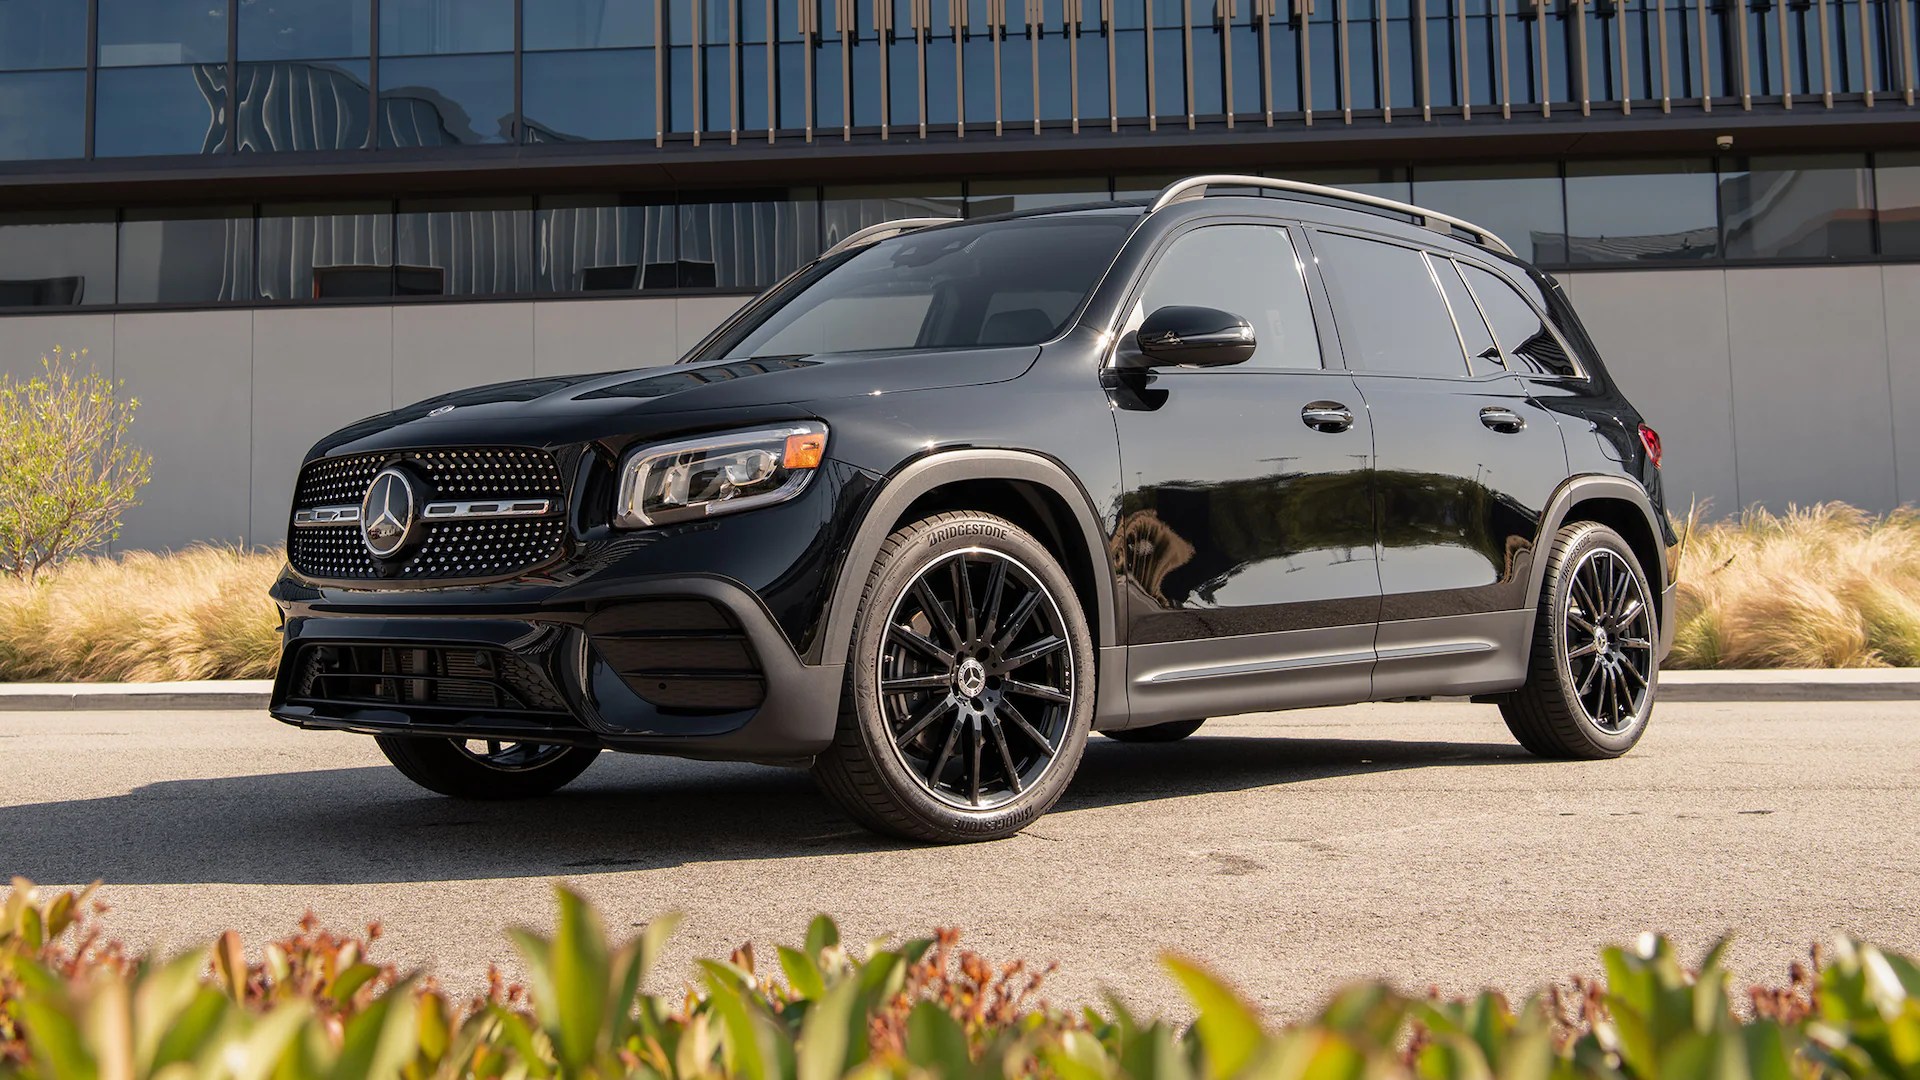 When you stomp the pedal, there's a noticeable . 2020 Mercedes Benz Glb 250 Review Is Mercedes Baby Gle A Proper Benz